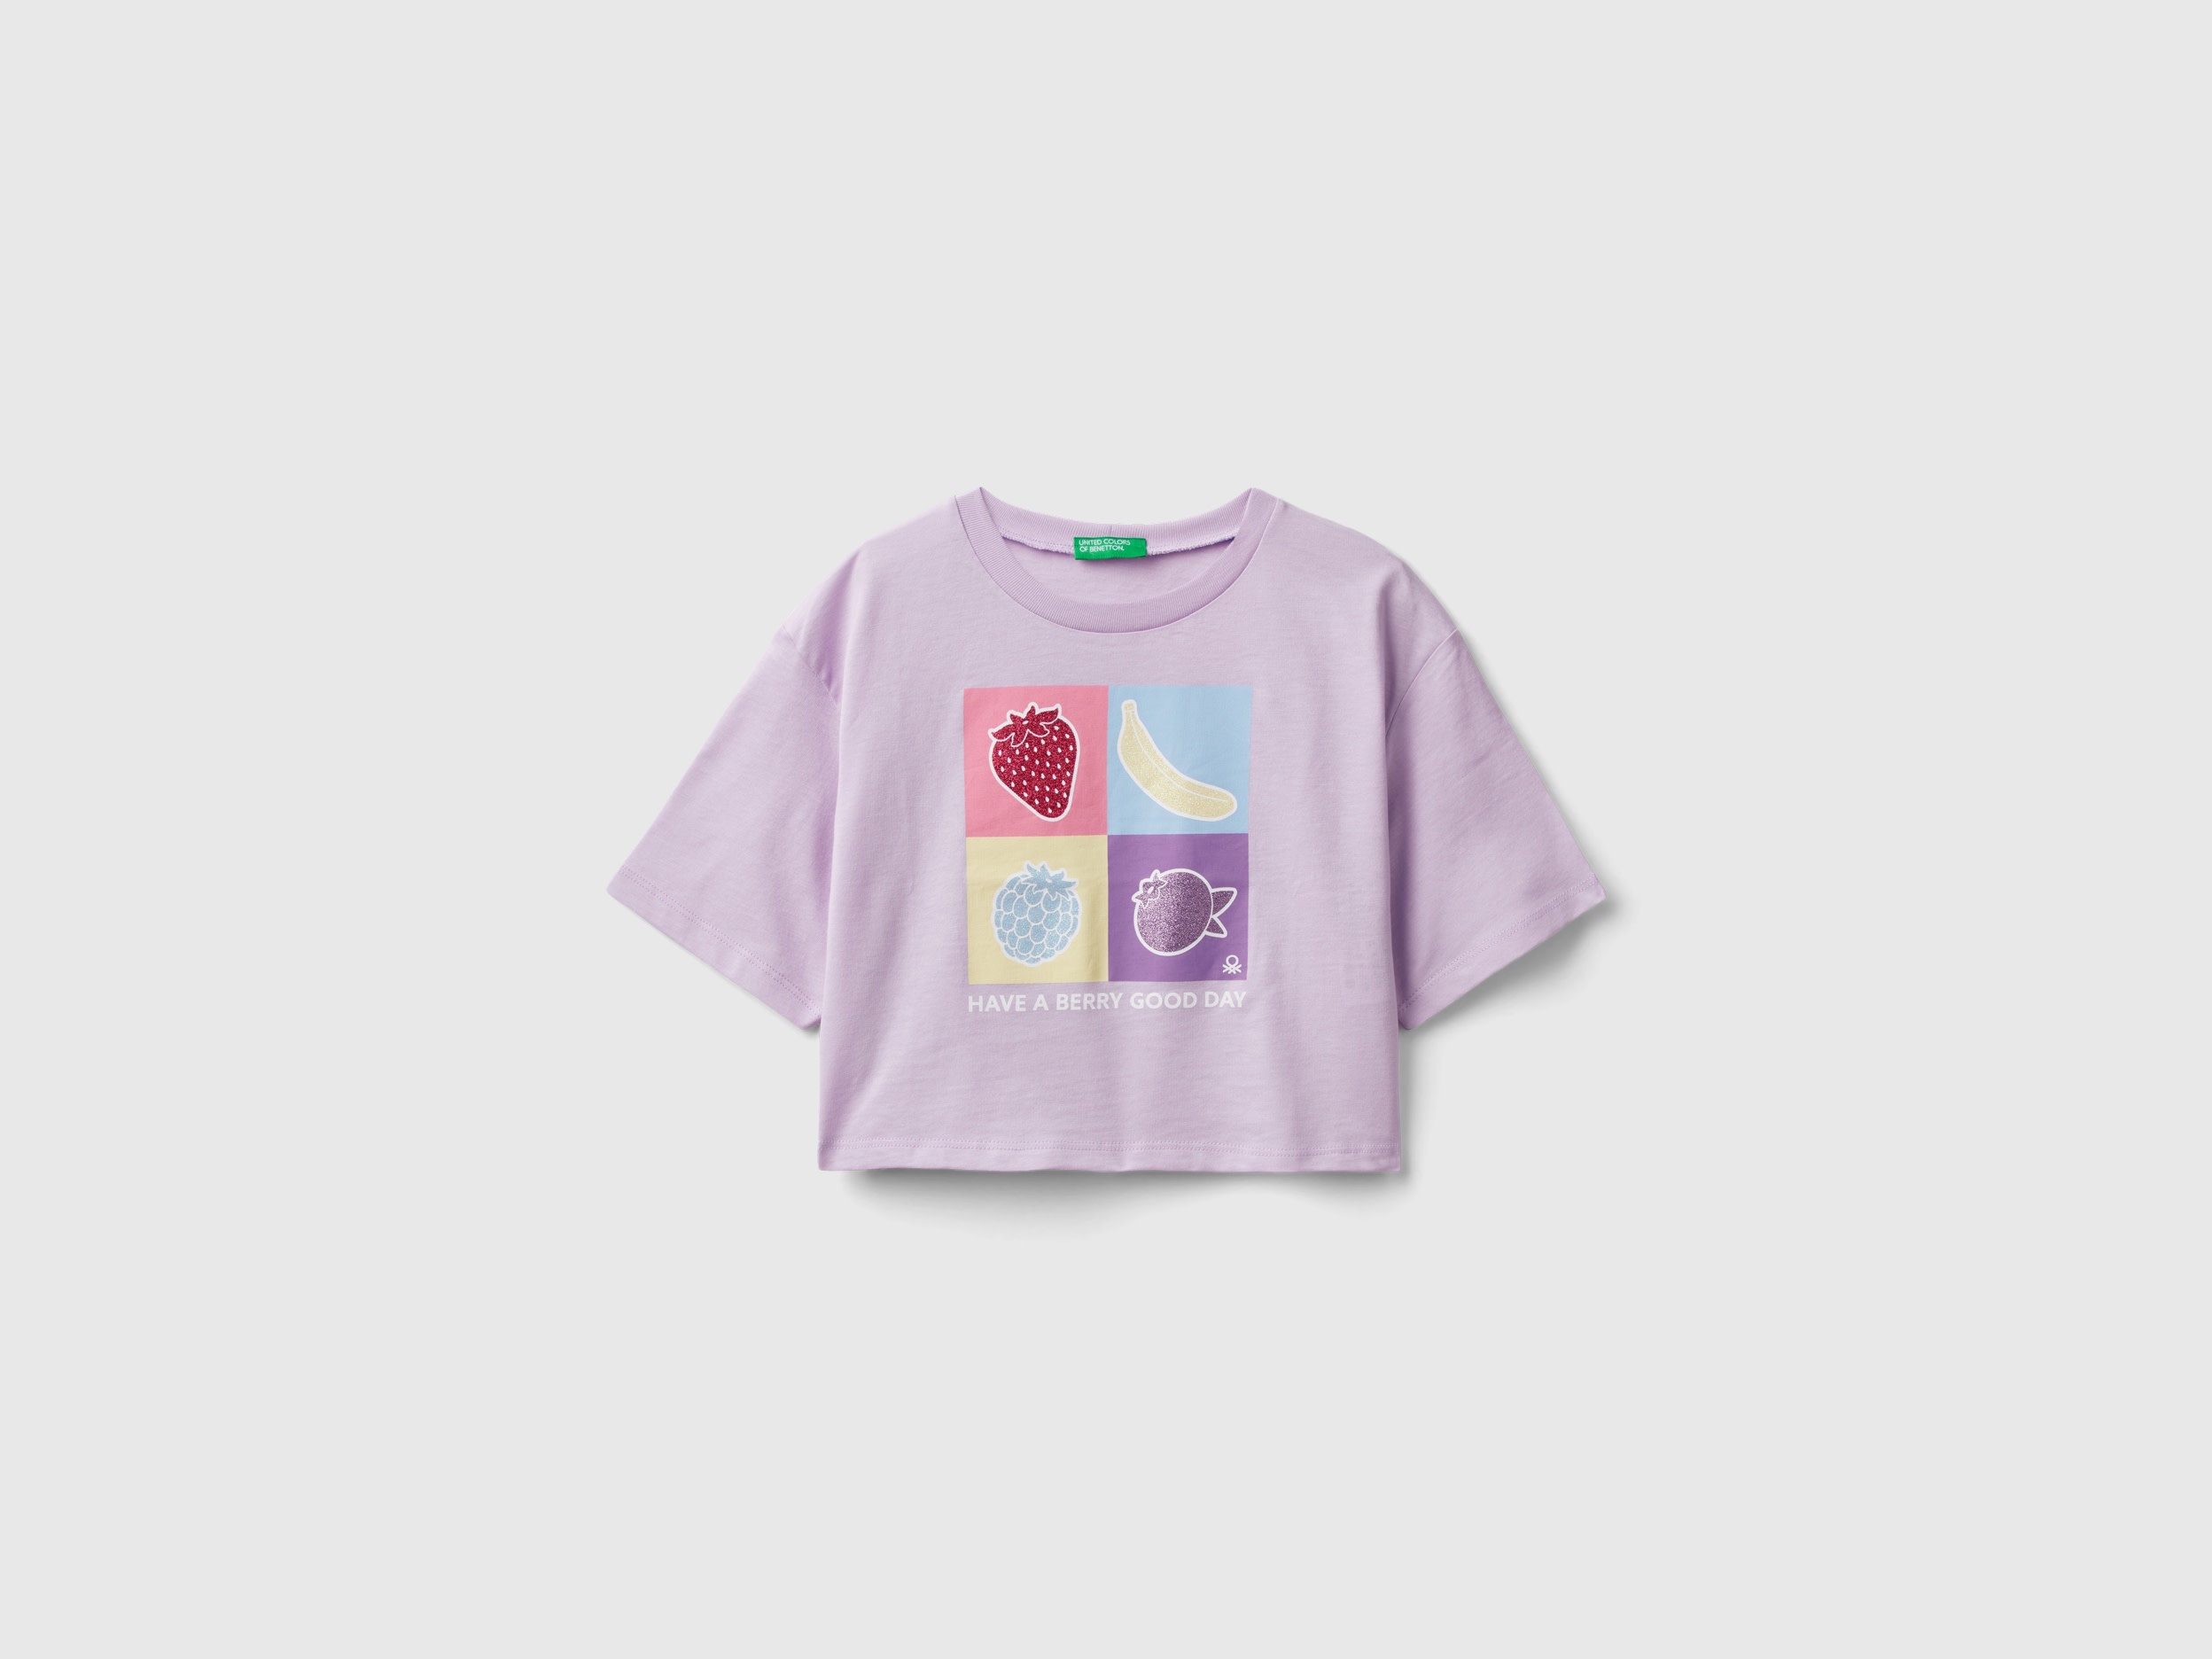 Image of Benetton, T-shirt With Glittery Print, size S, Lilac, Kids